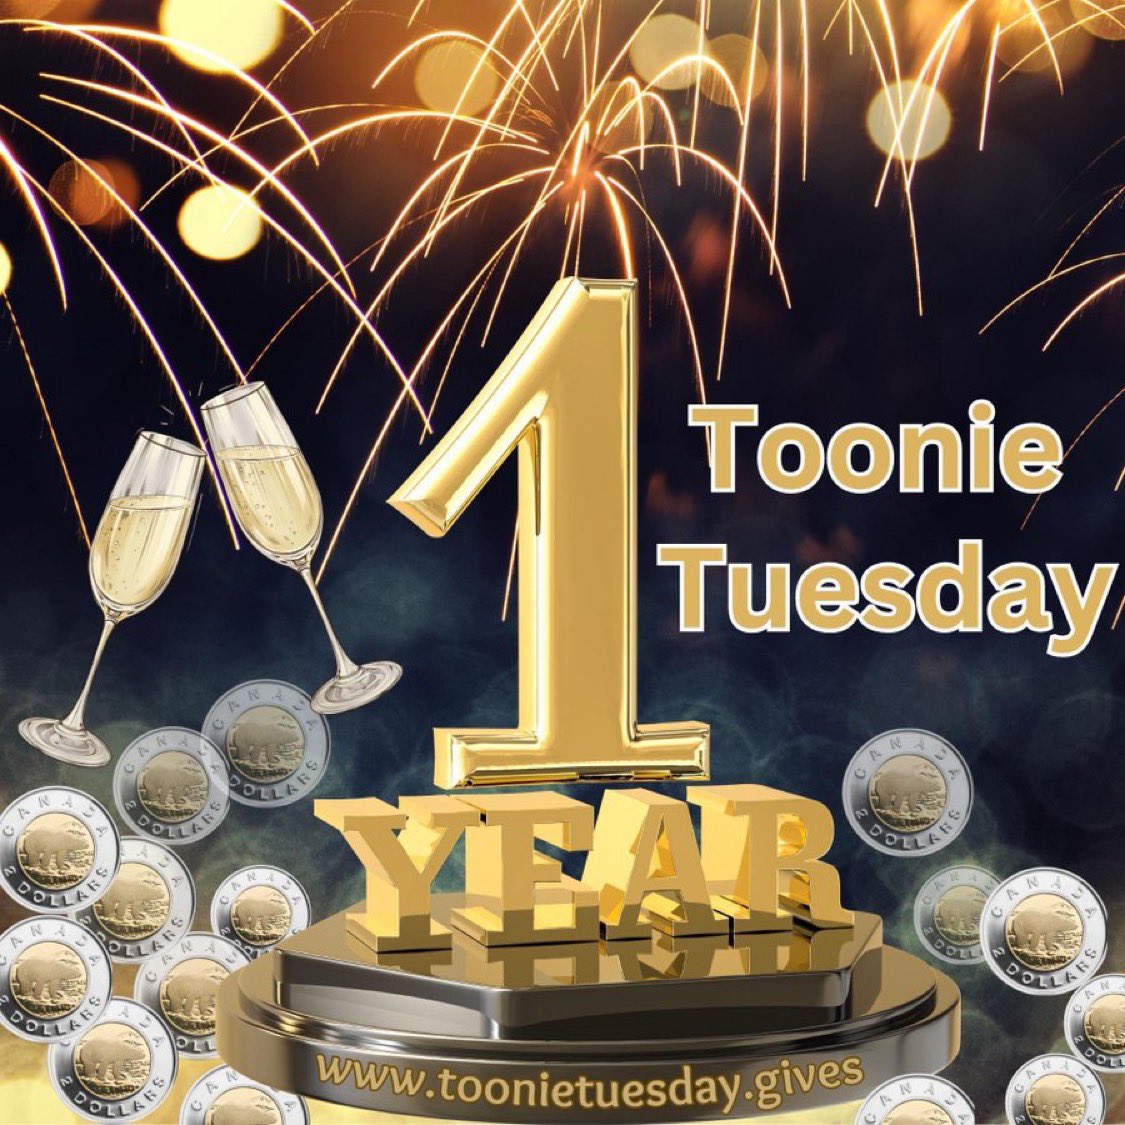 Happy 1⃣year anniversary to @toonie_tuesday -the amazing collective fundraising initiative orchestrated by @CanadianKobzar and @FellaSam79 #TeamYuri congratulates you on an amazing year, and thanks you. Your @Y_Chornomorets initiative was the first one to break the $10K mark.